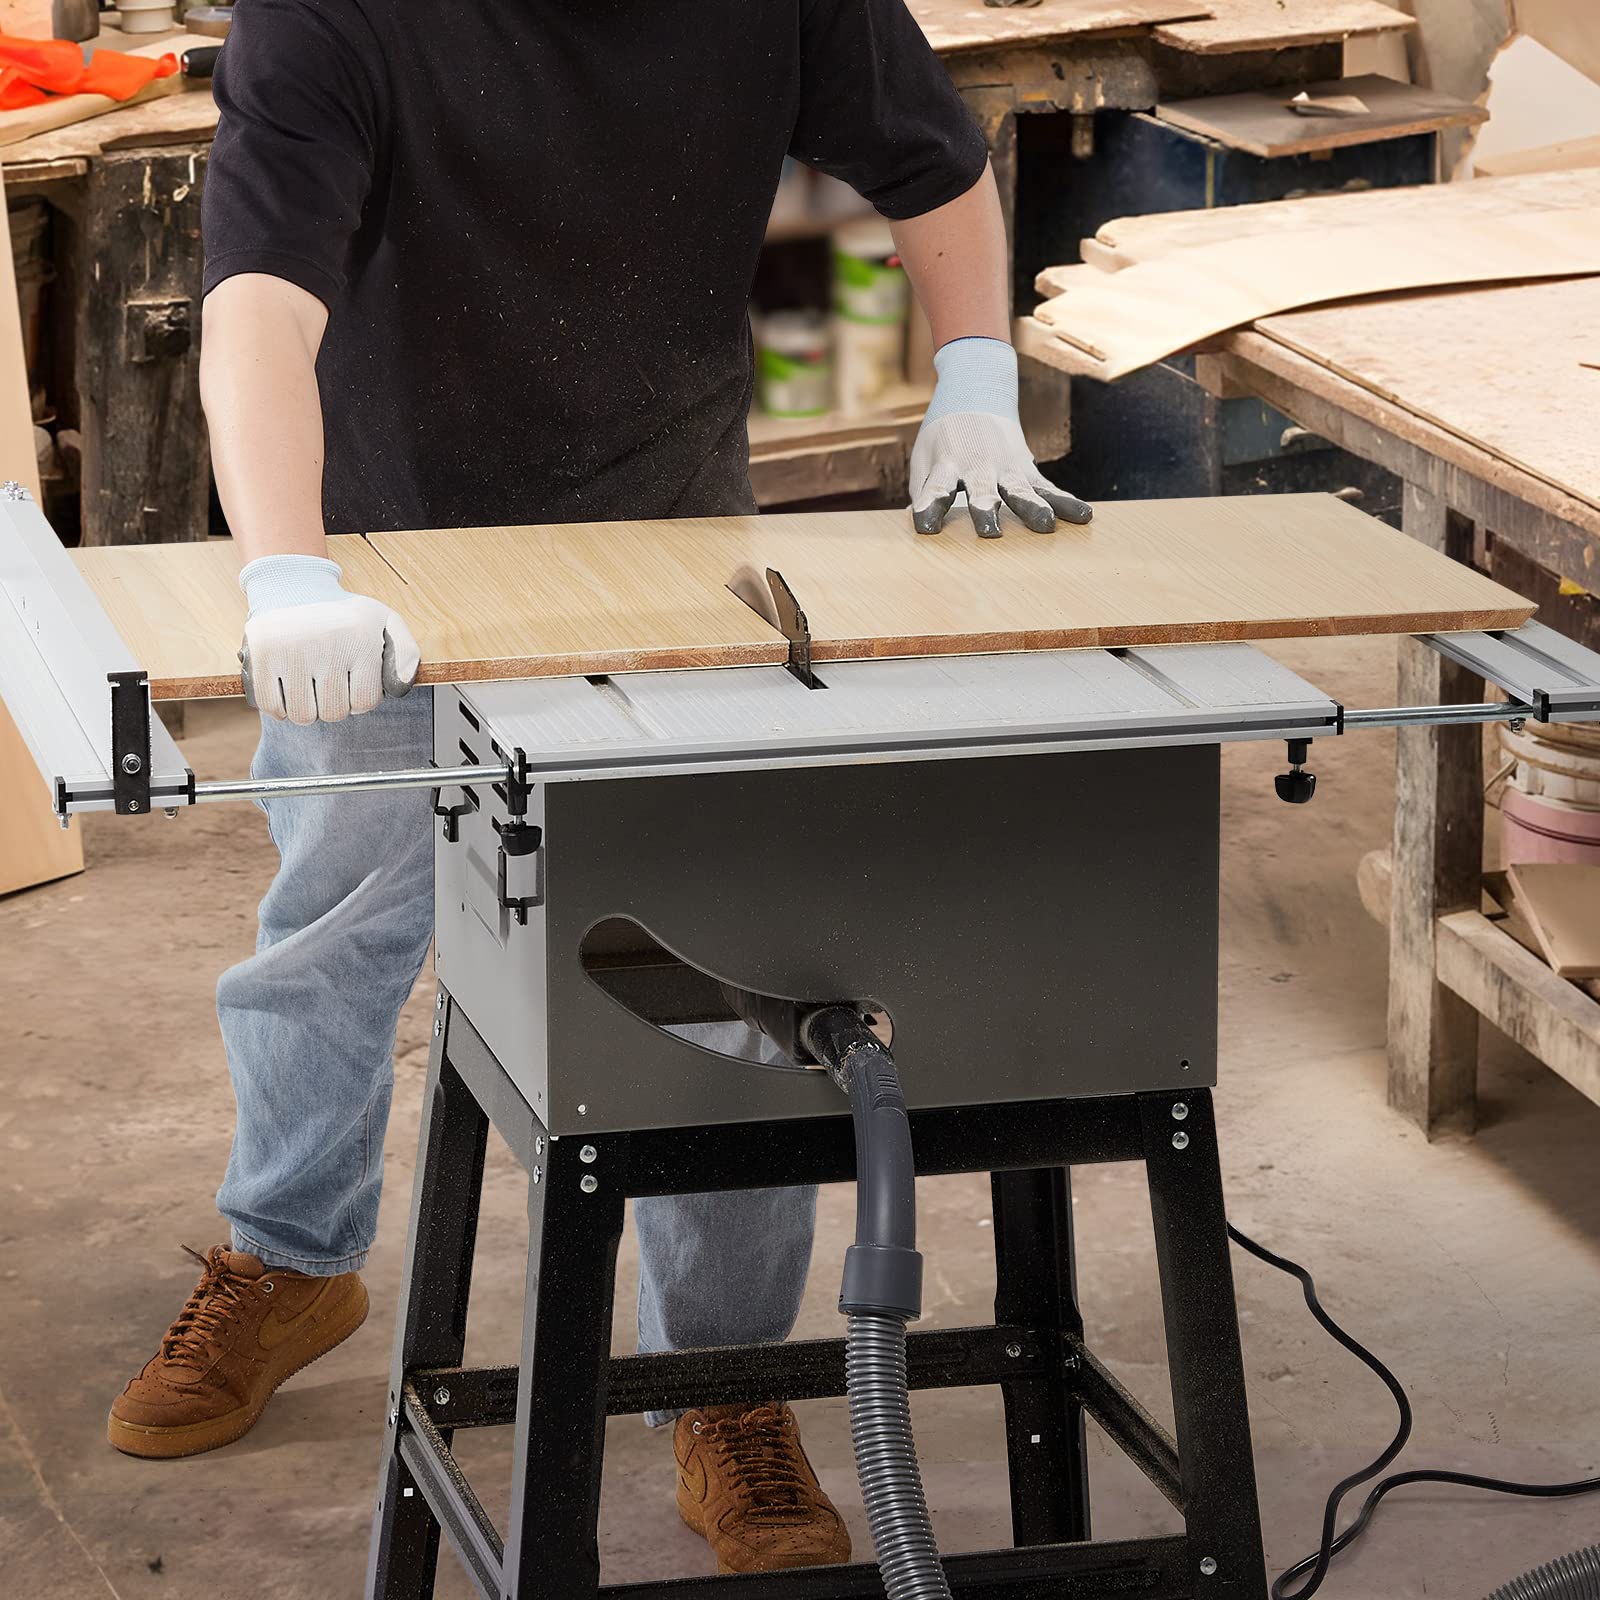 10 Inch 15A Table Saw with Stand - 5000RPM, 90°/0-45° Cuts